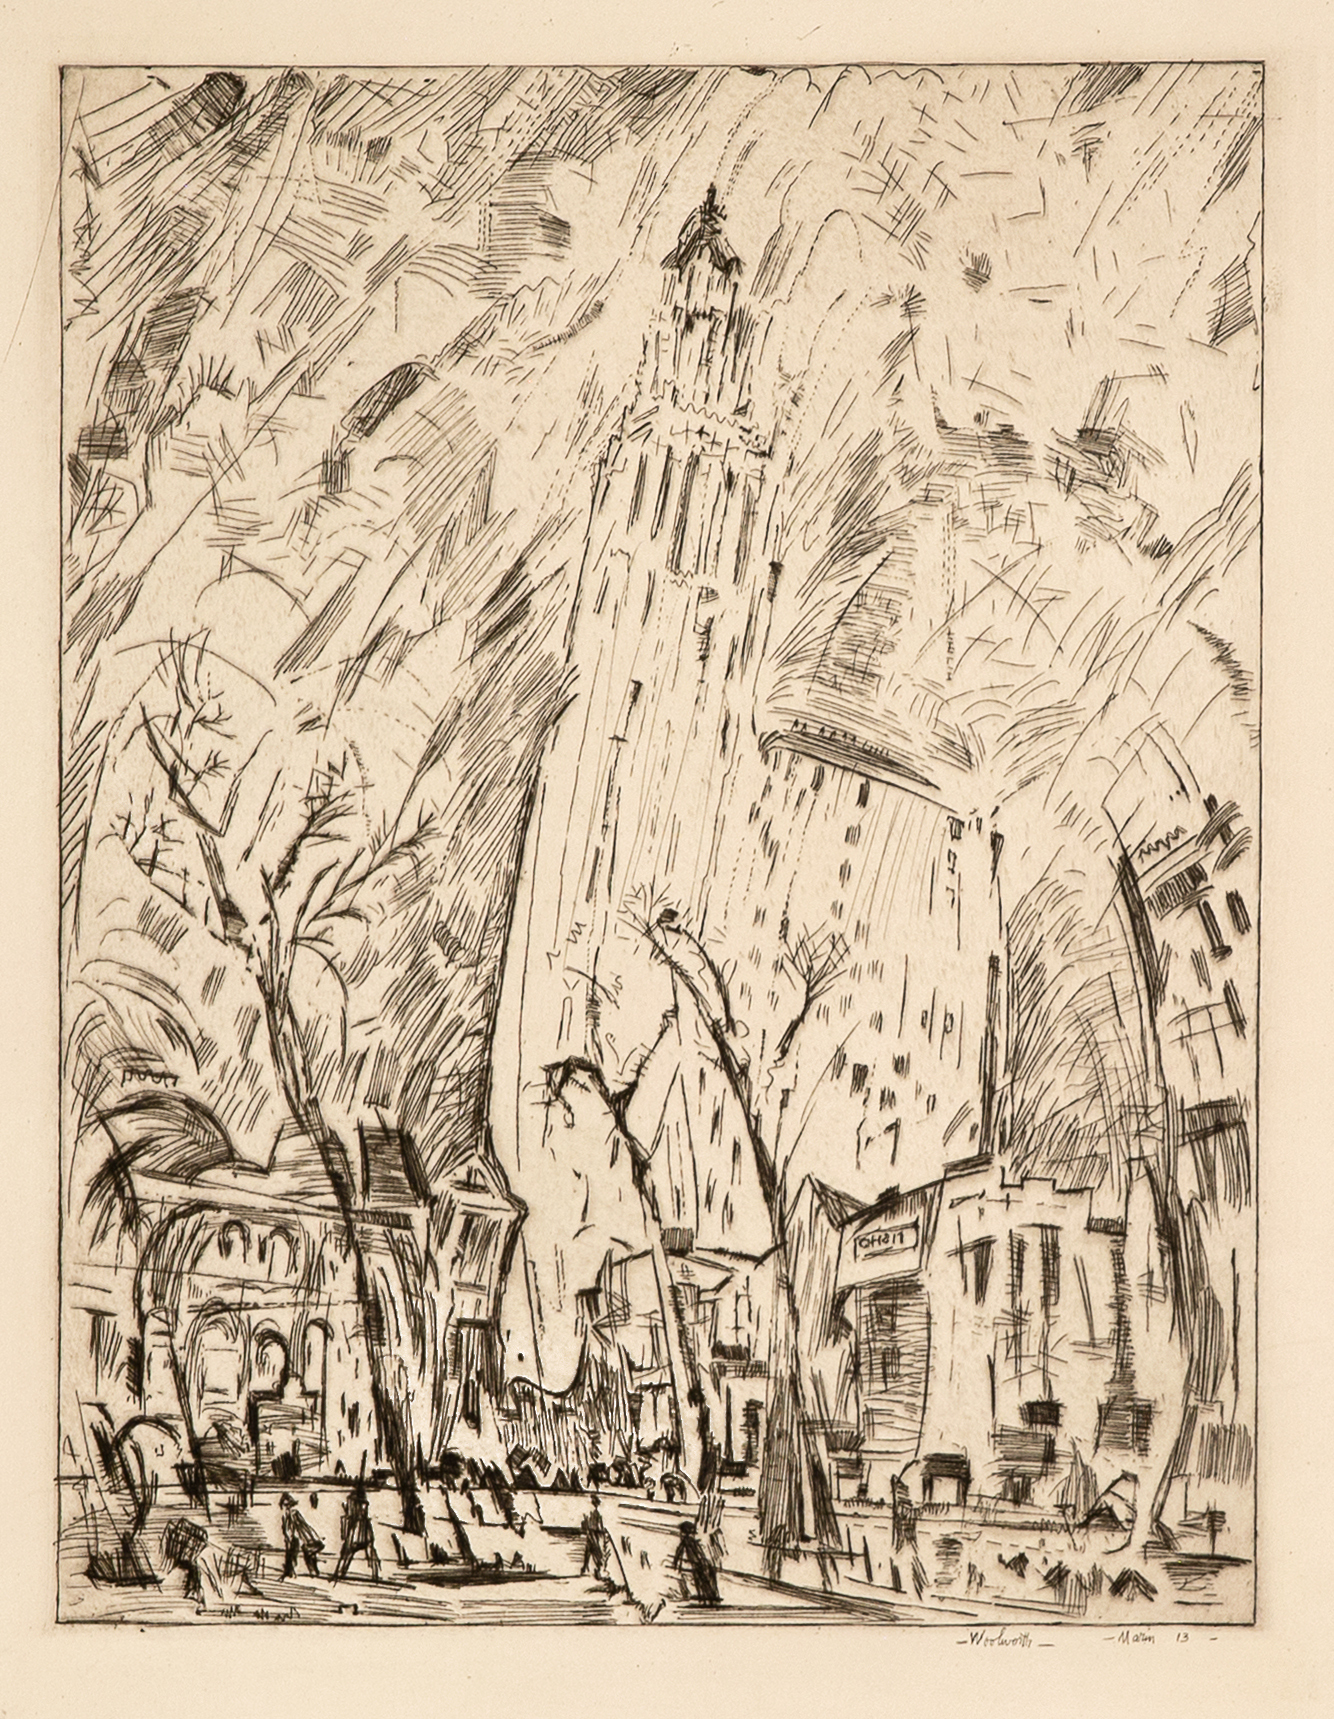 
		                					John Marin		                																	
																											<i>Woolworth Building (The Dance),</i>  
																																								1913, 
																																								intaglio print - etching, 
																																								11 x 8 1/2 inches 
																								
		                				